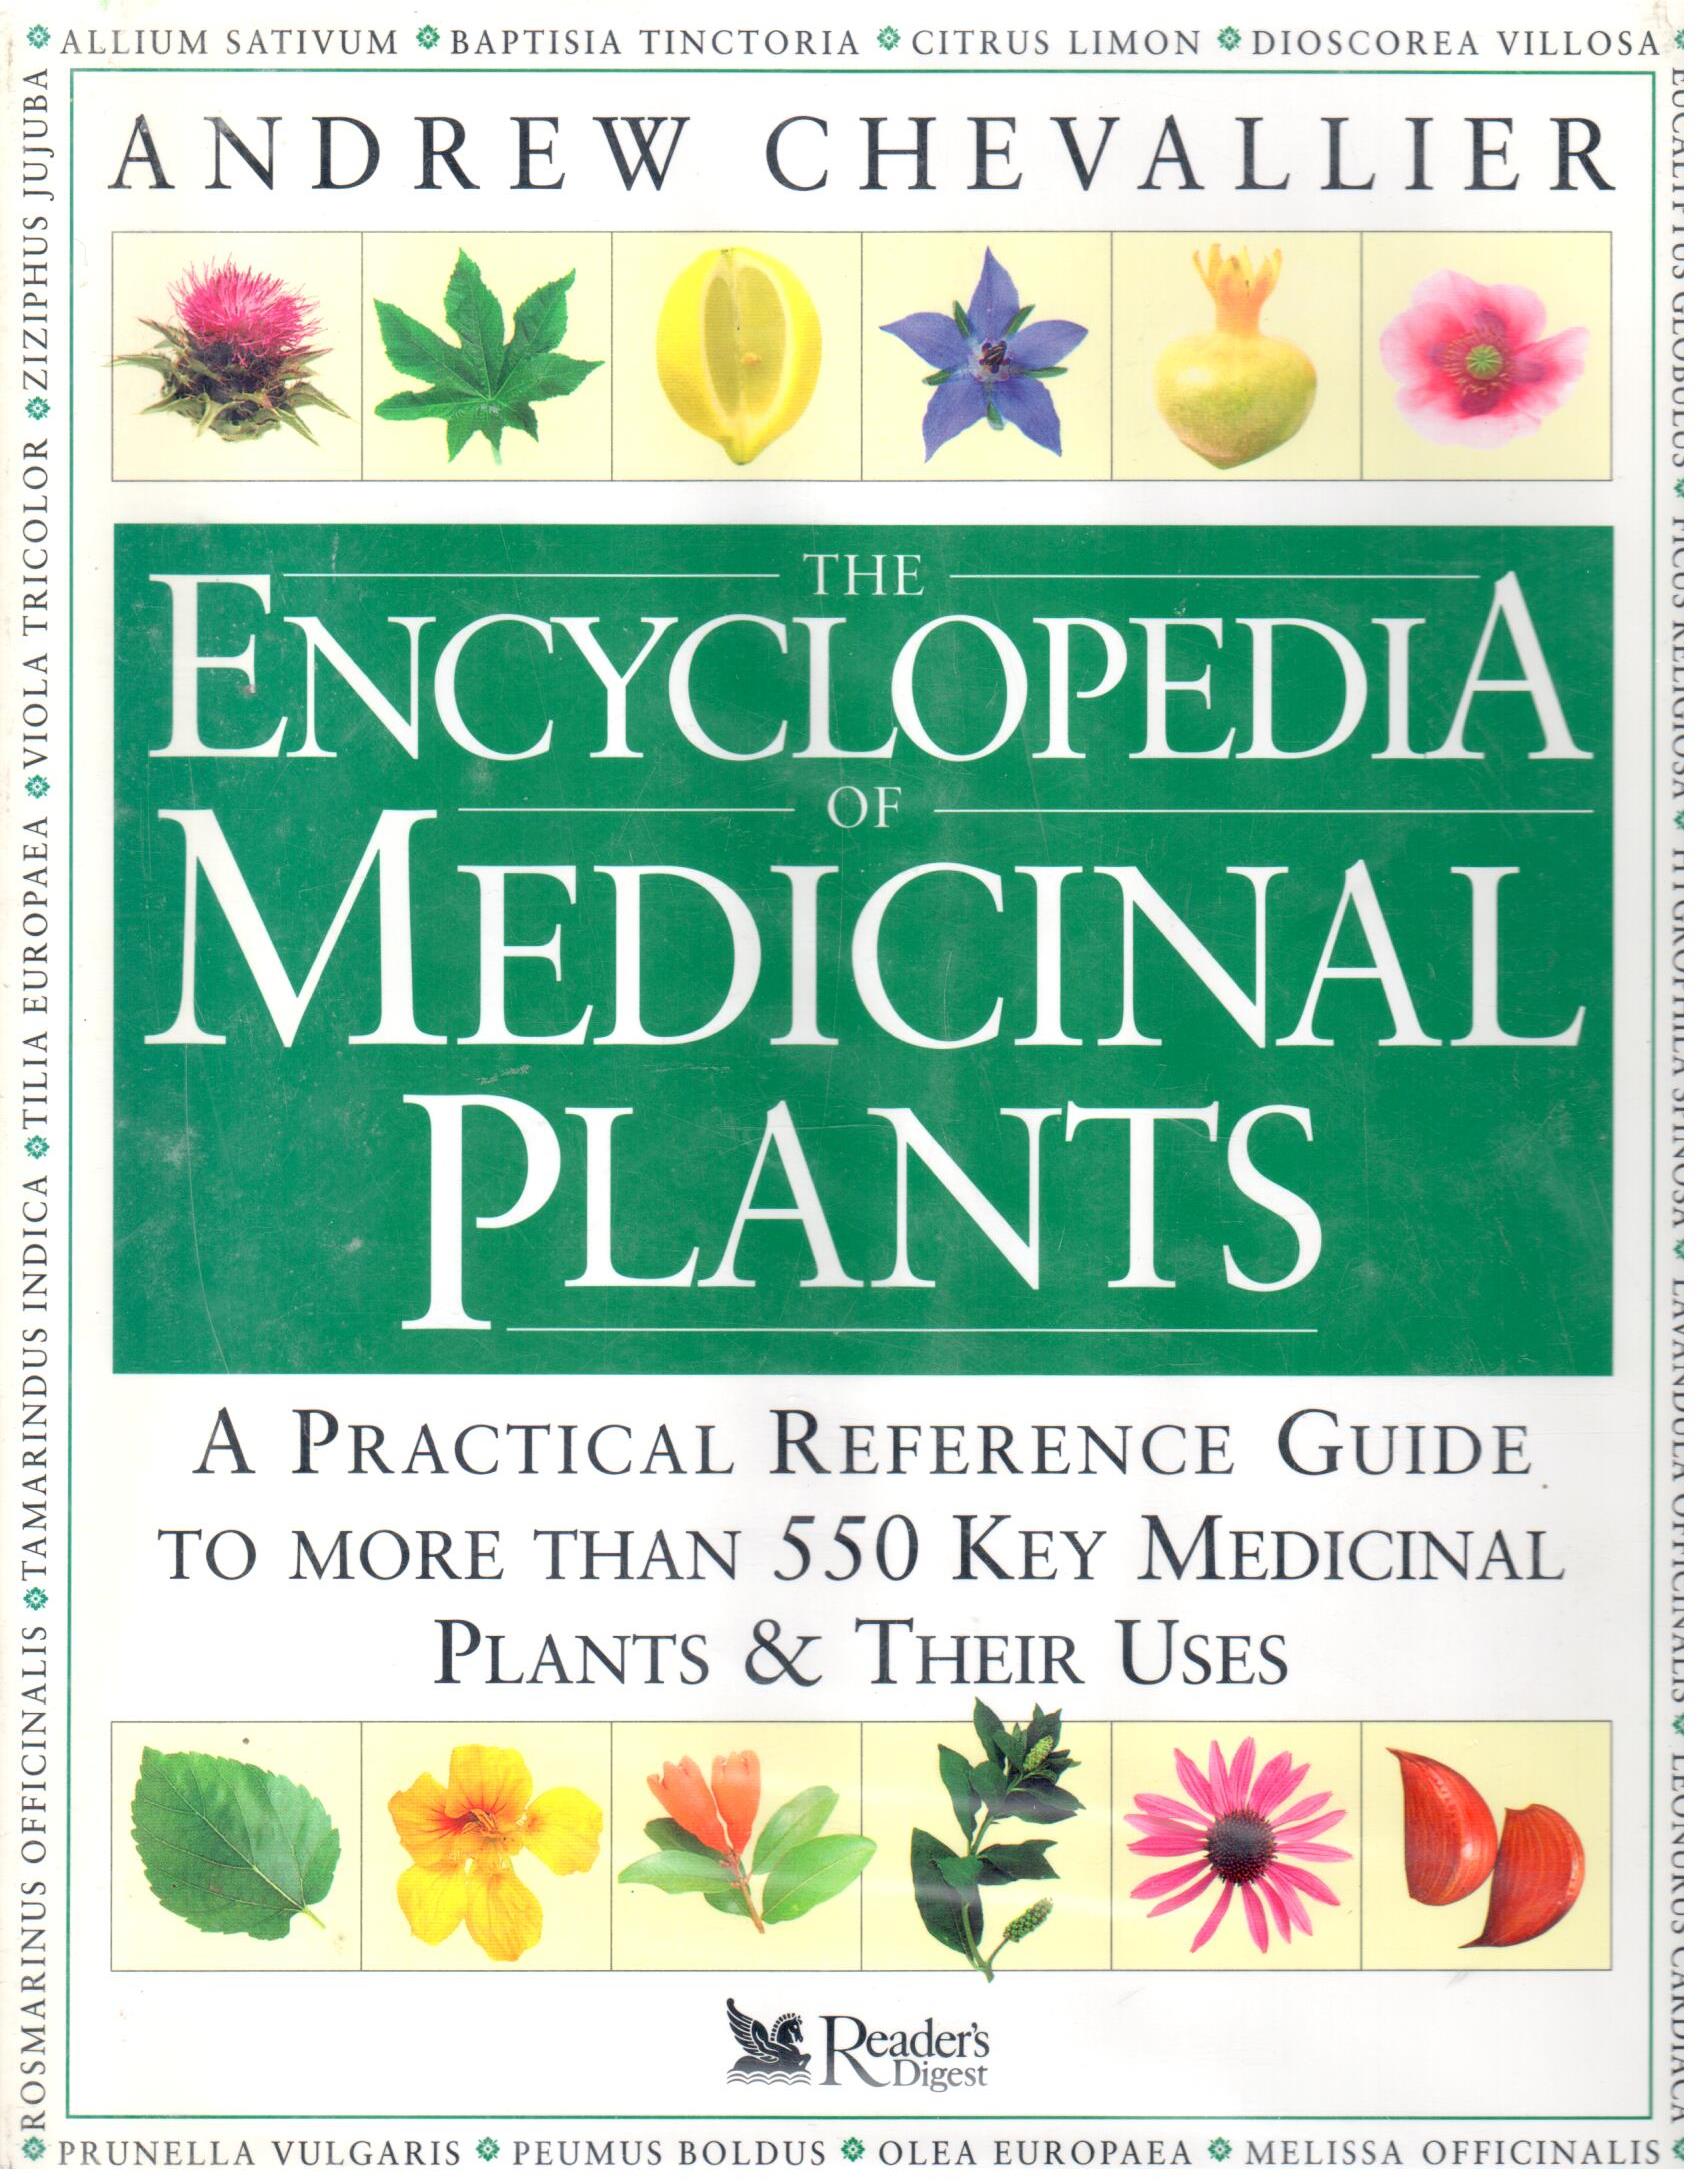 The encyclopedia of medicinal plants : a practical reference guid to more than 550 key medicinal plants & their uses